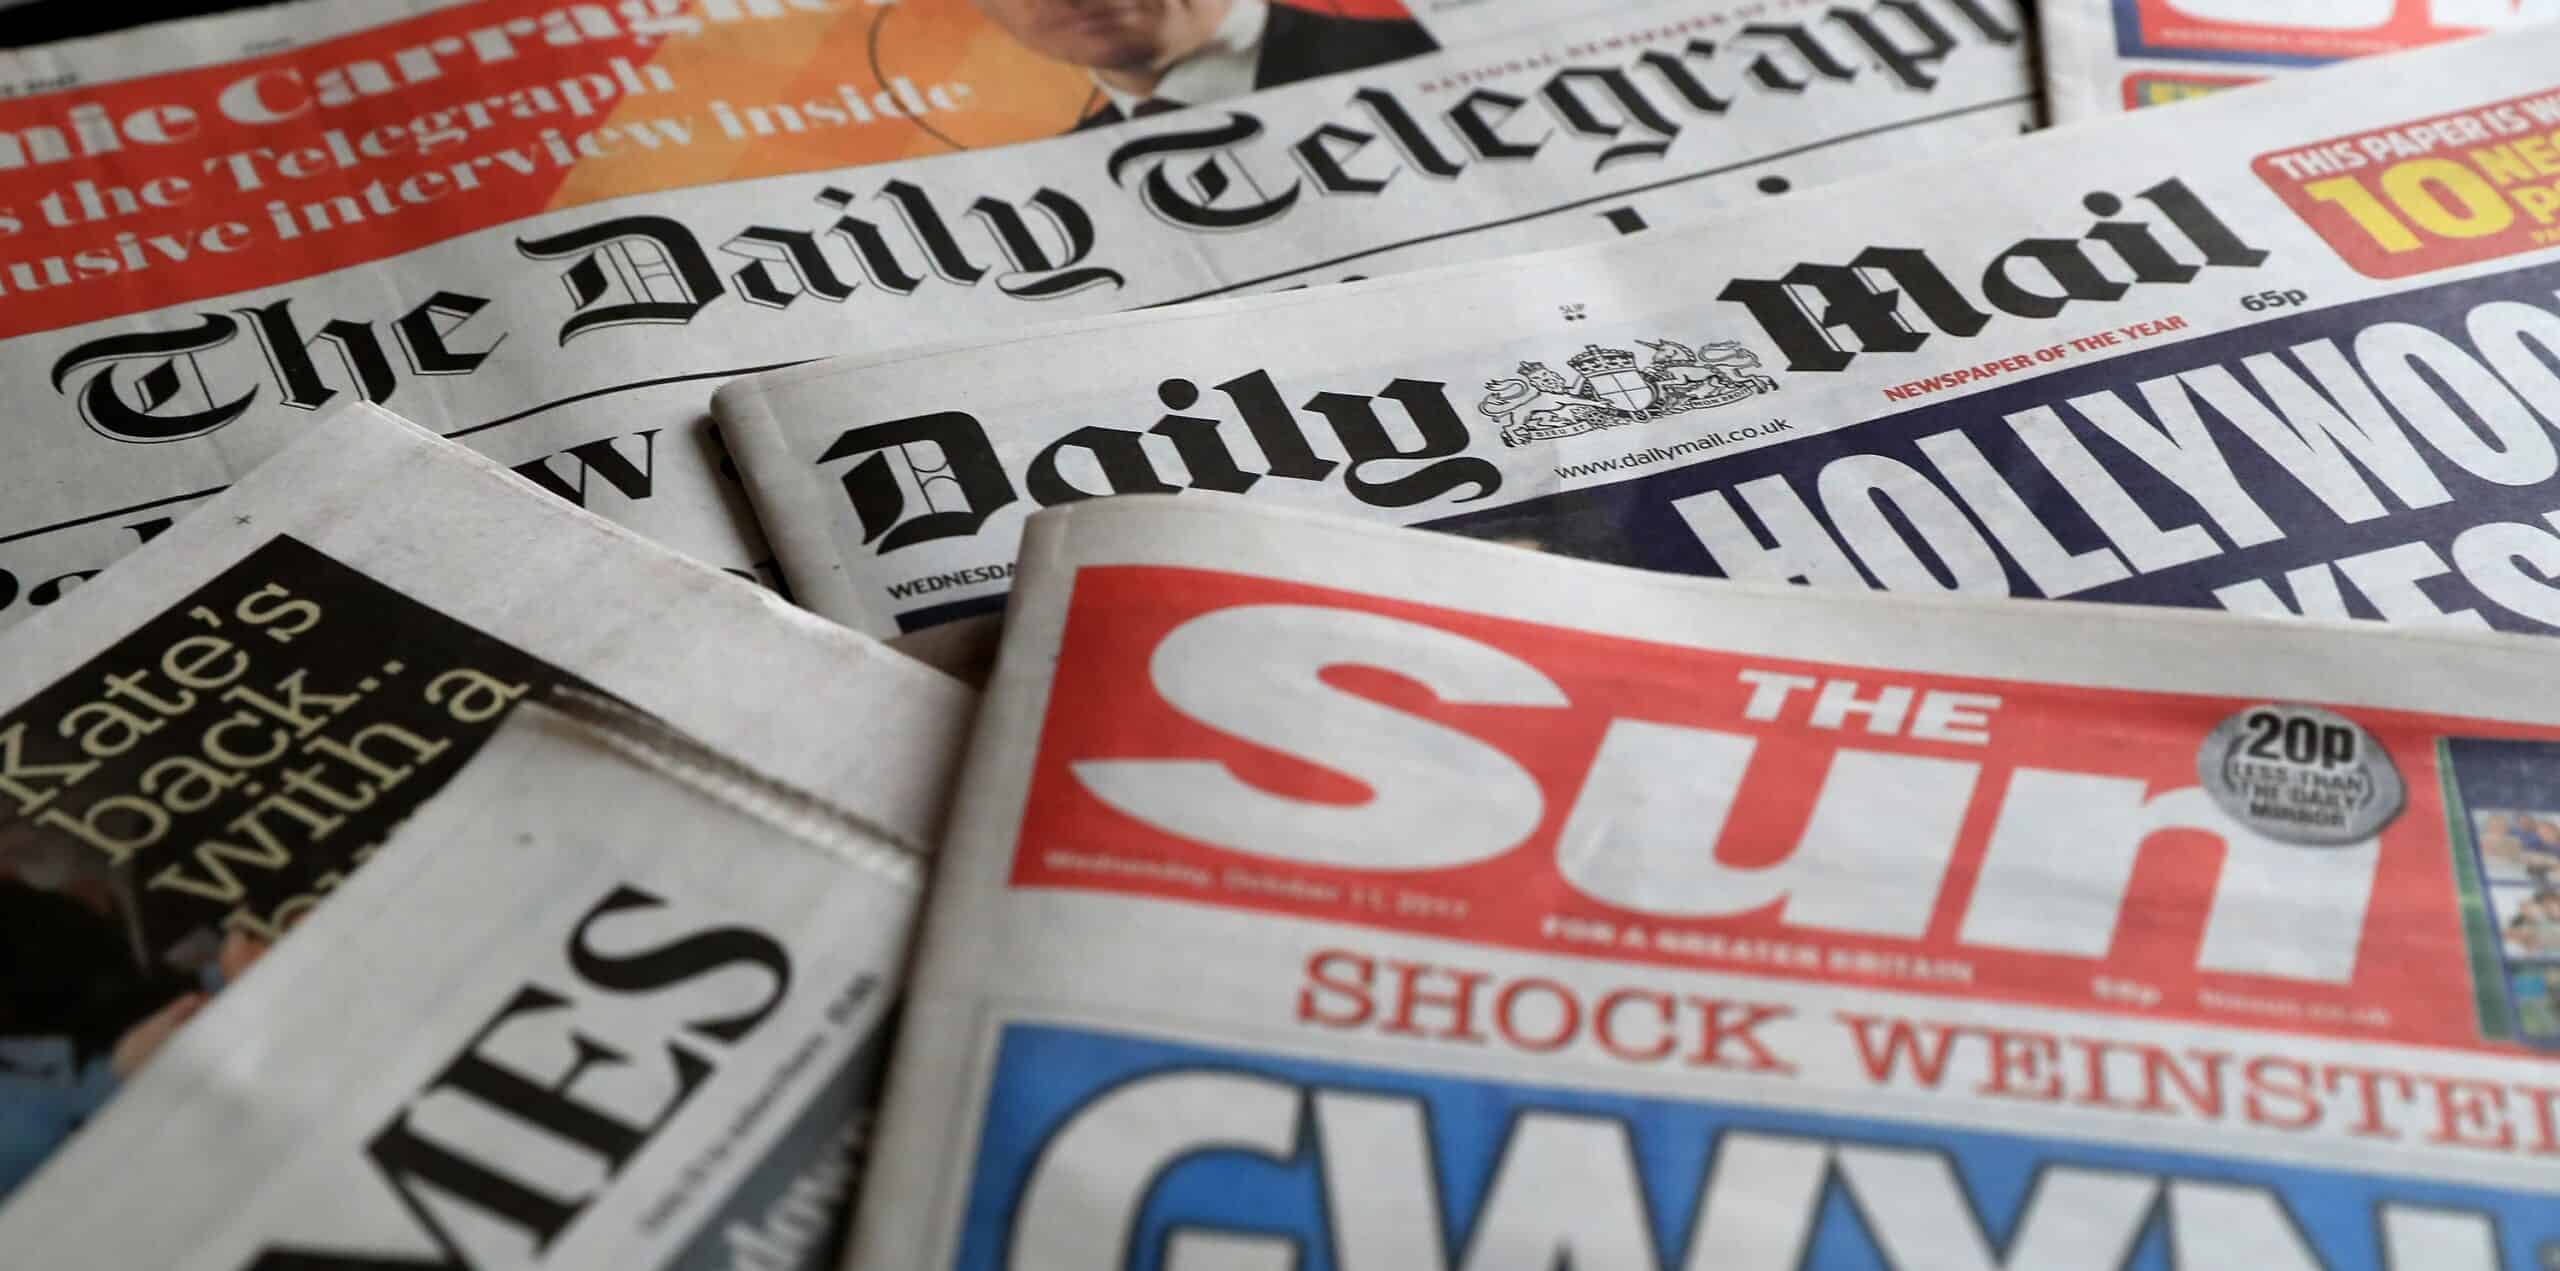 ‘Utterly disingenuous’ of The Sun to claim they did not suggest illegality in BBC presenter story